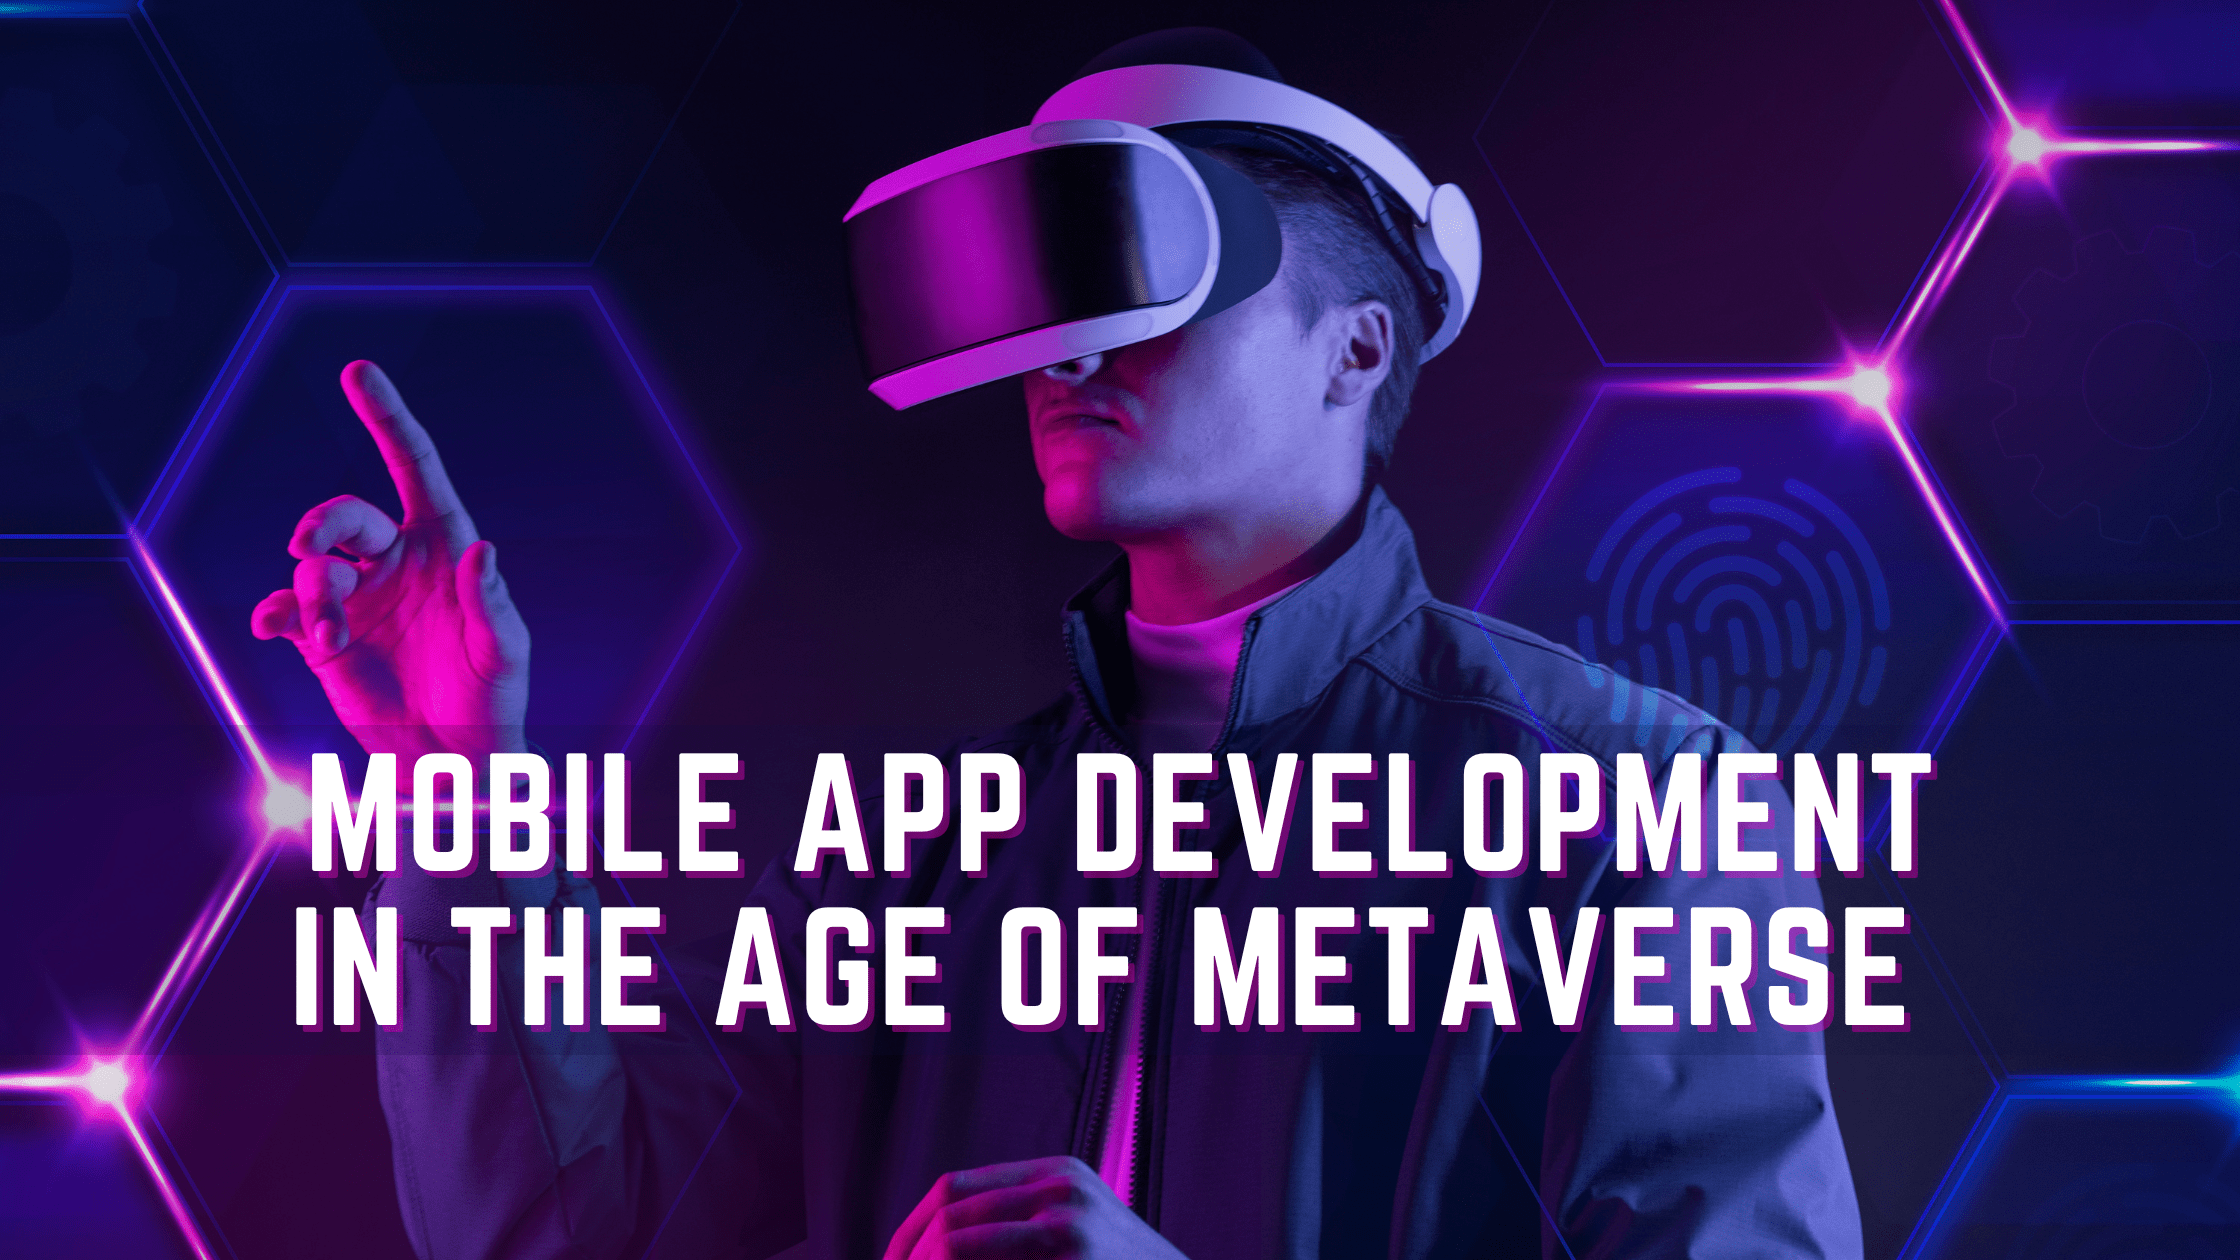 MOBILE APP DEVELOPMENT IN THE AGE OF METAVERSE